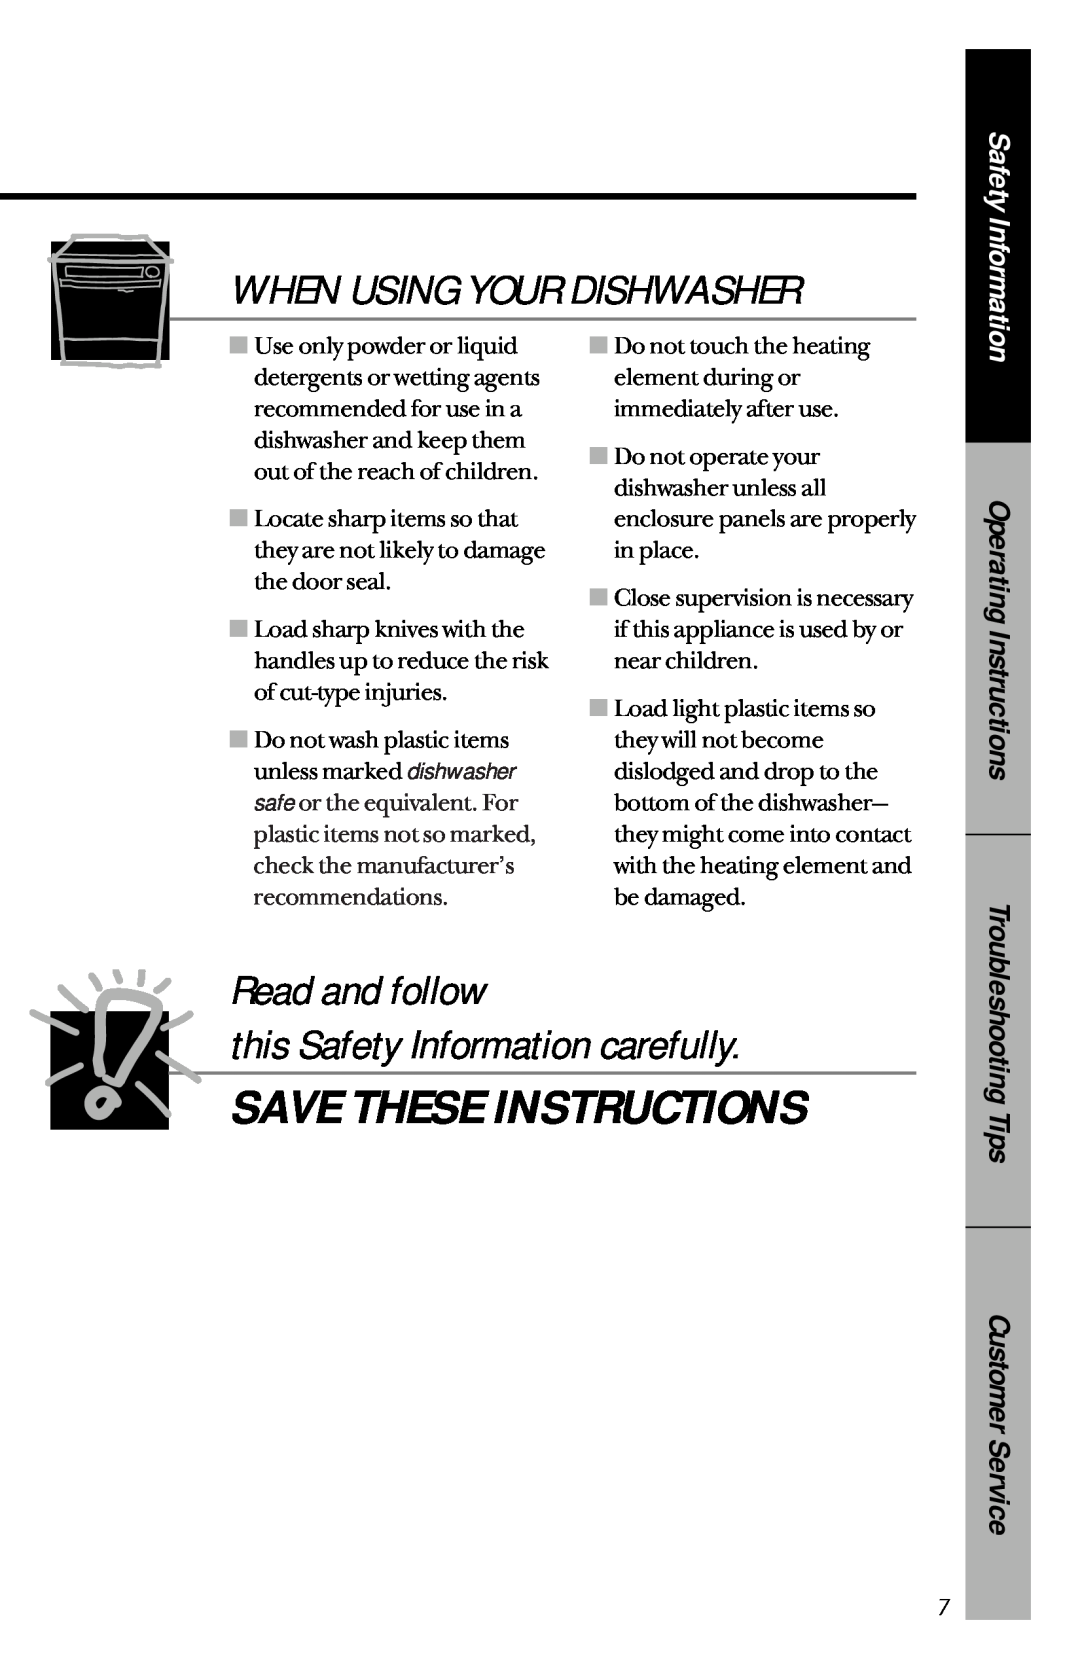 RCA PSD1000, PSD3430 Read and follow this Safety Information carefully, When Using Your Dishwasher, Operating Instructions 